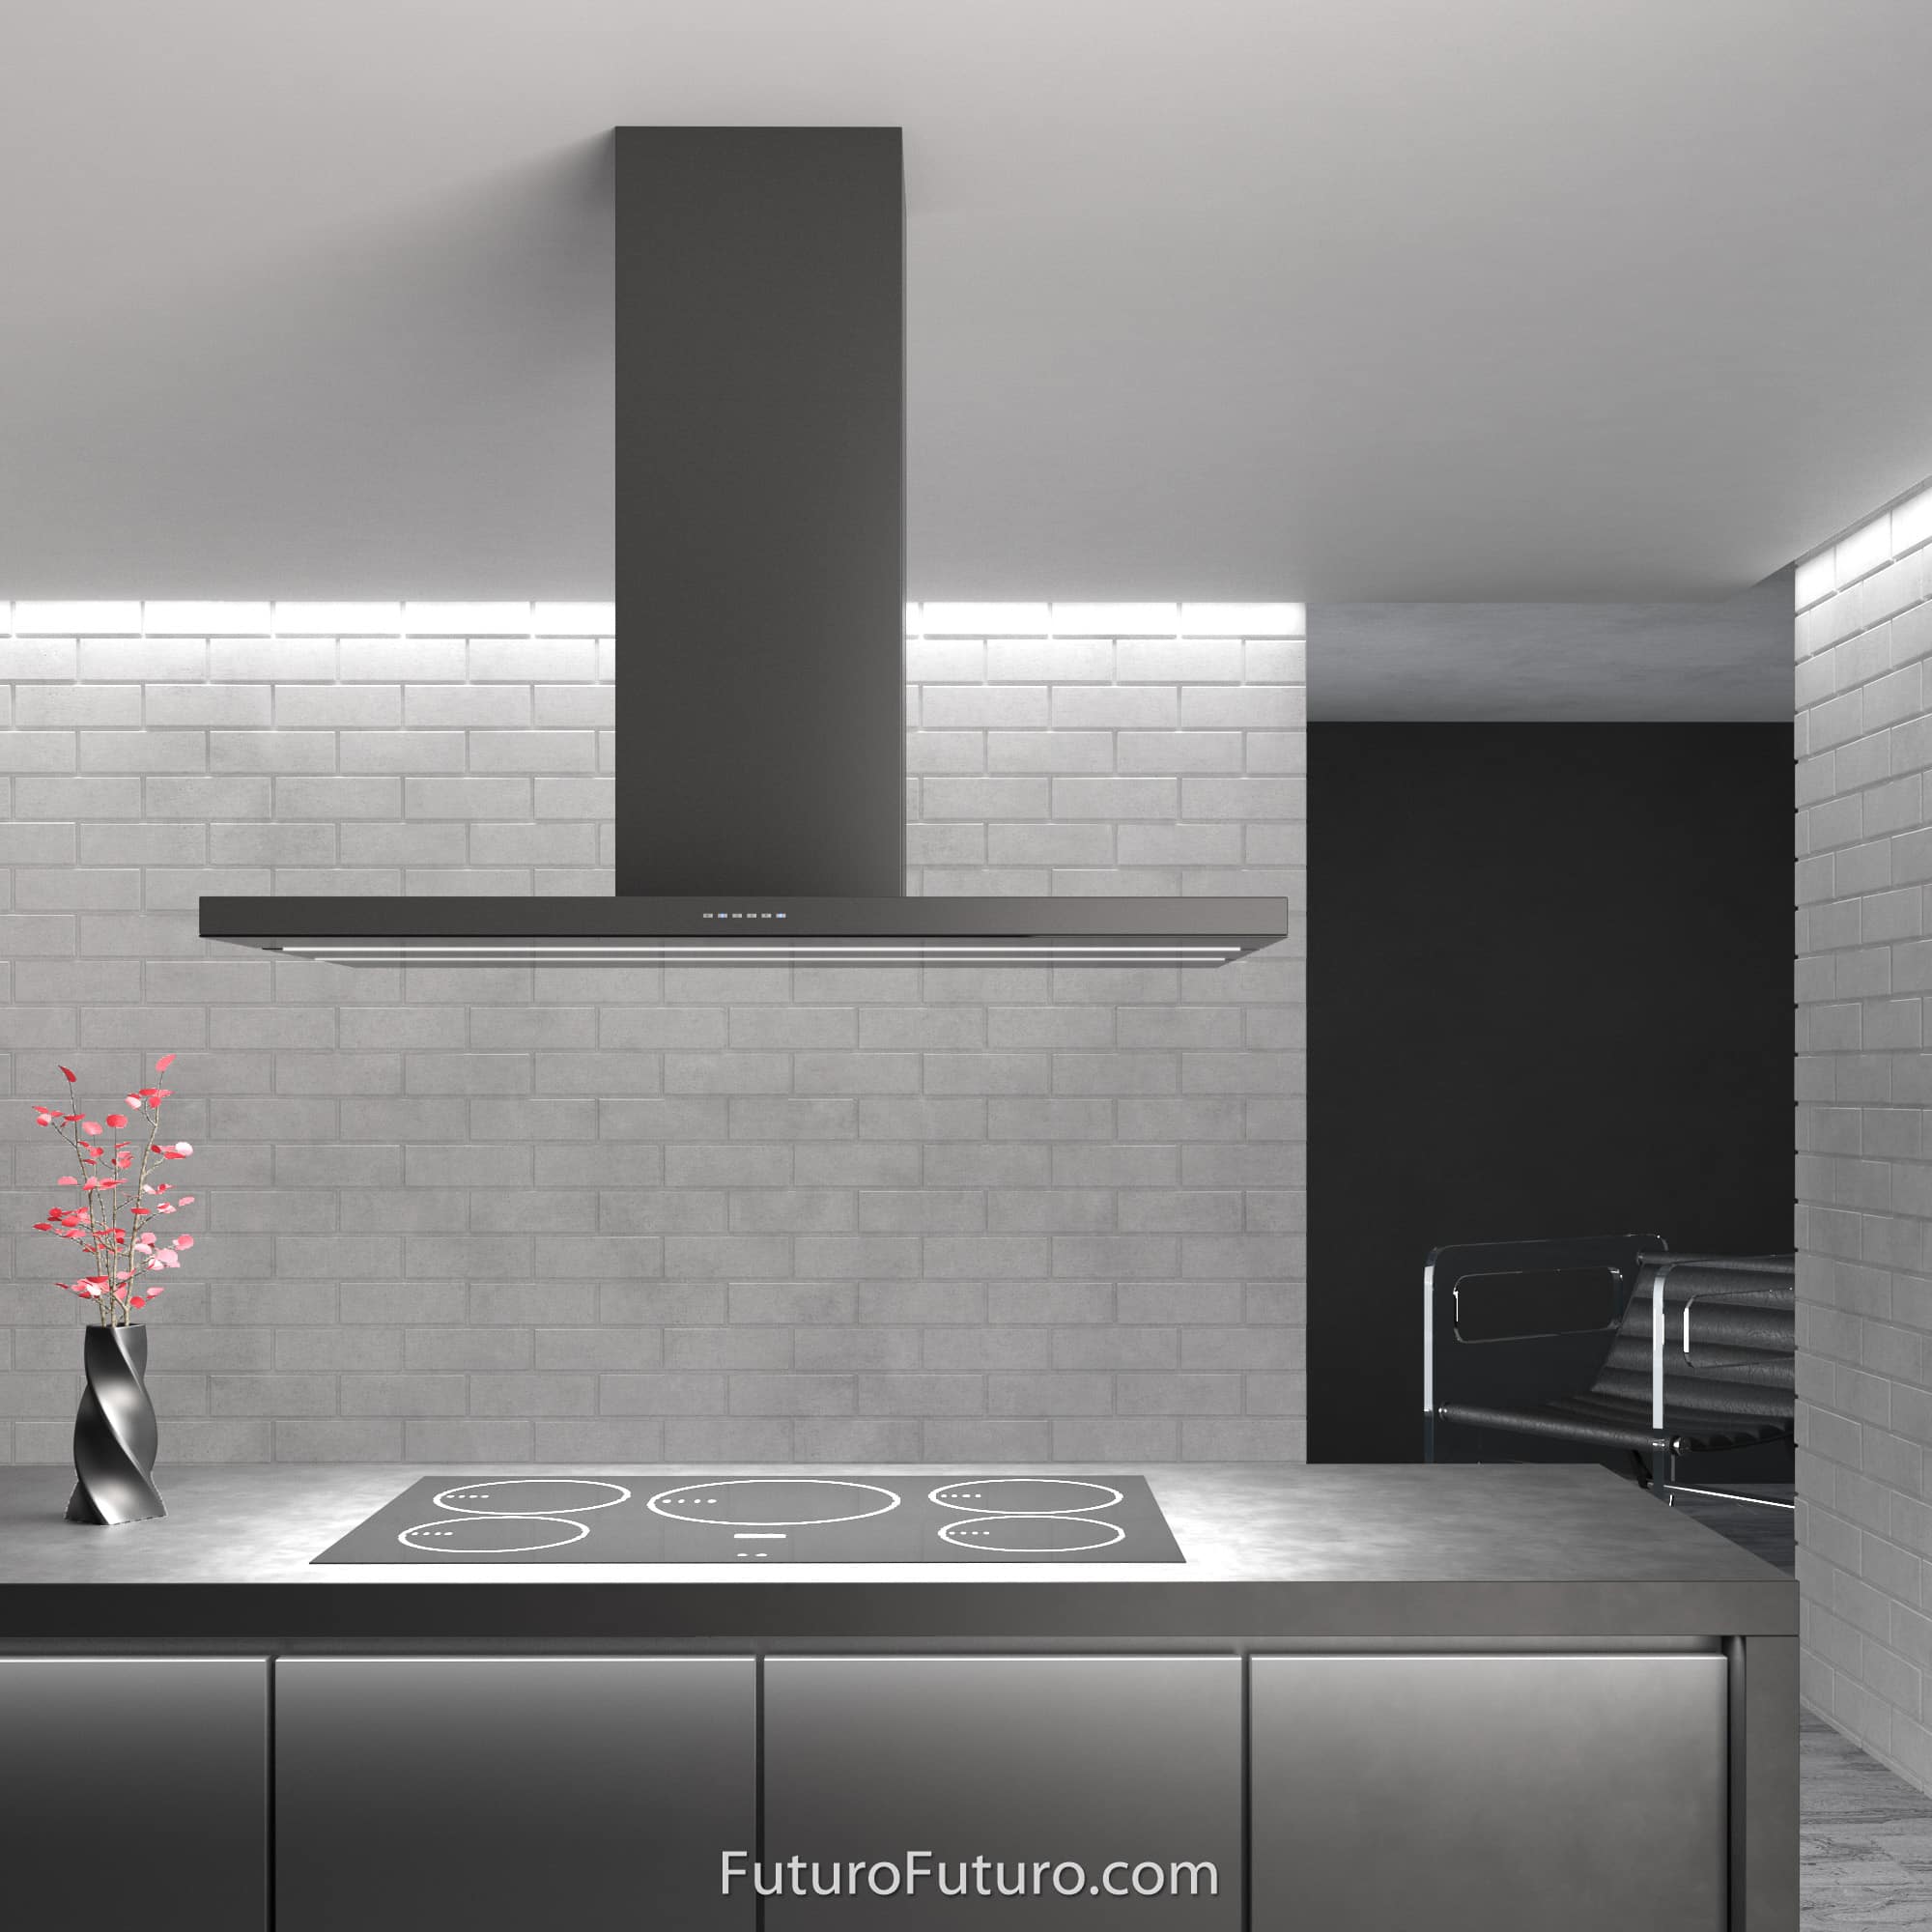 Hottest Black Range Hood Trends - You Won't Want to Miss Them!